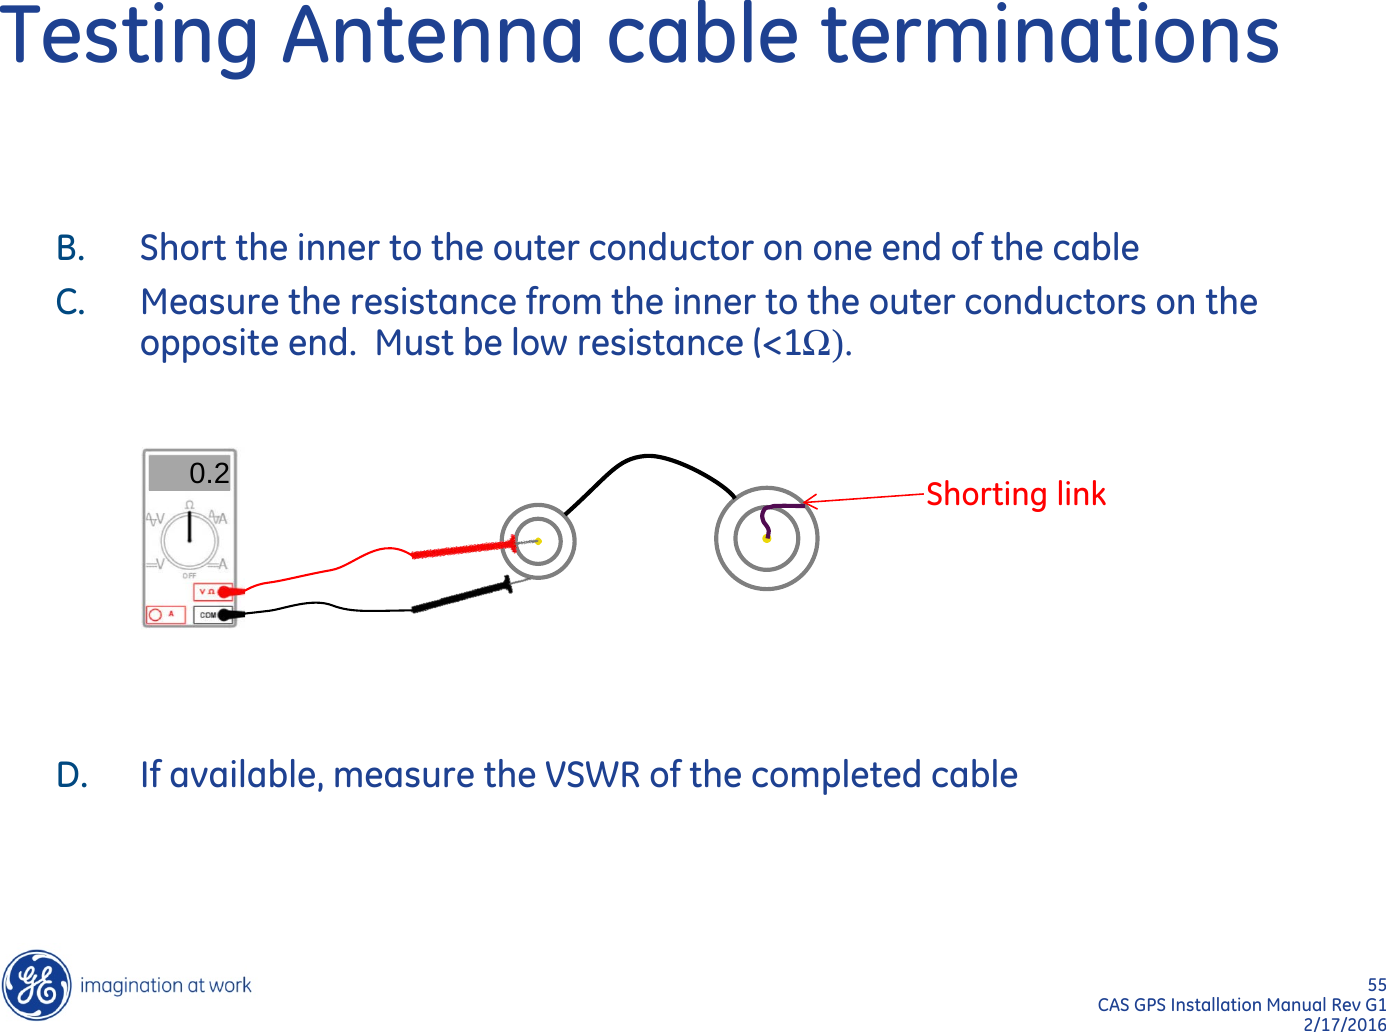 55  CAS GPS Installation Manual Rev G1 2/17/2016 Testing Antenna cable terminations B. Short the inner to the outer conductor on one end of the cable C. Measure the resistance from the inner to the outer conductors on the opposite end.  Must be low resistance (&lt;1Ω).        D. If available, measure the VSWR of the completed cable  0.2 Shorting link 